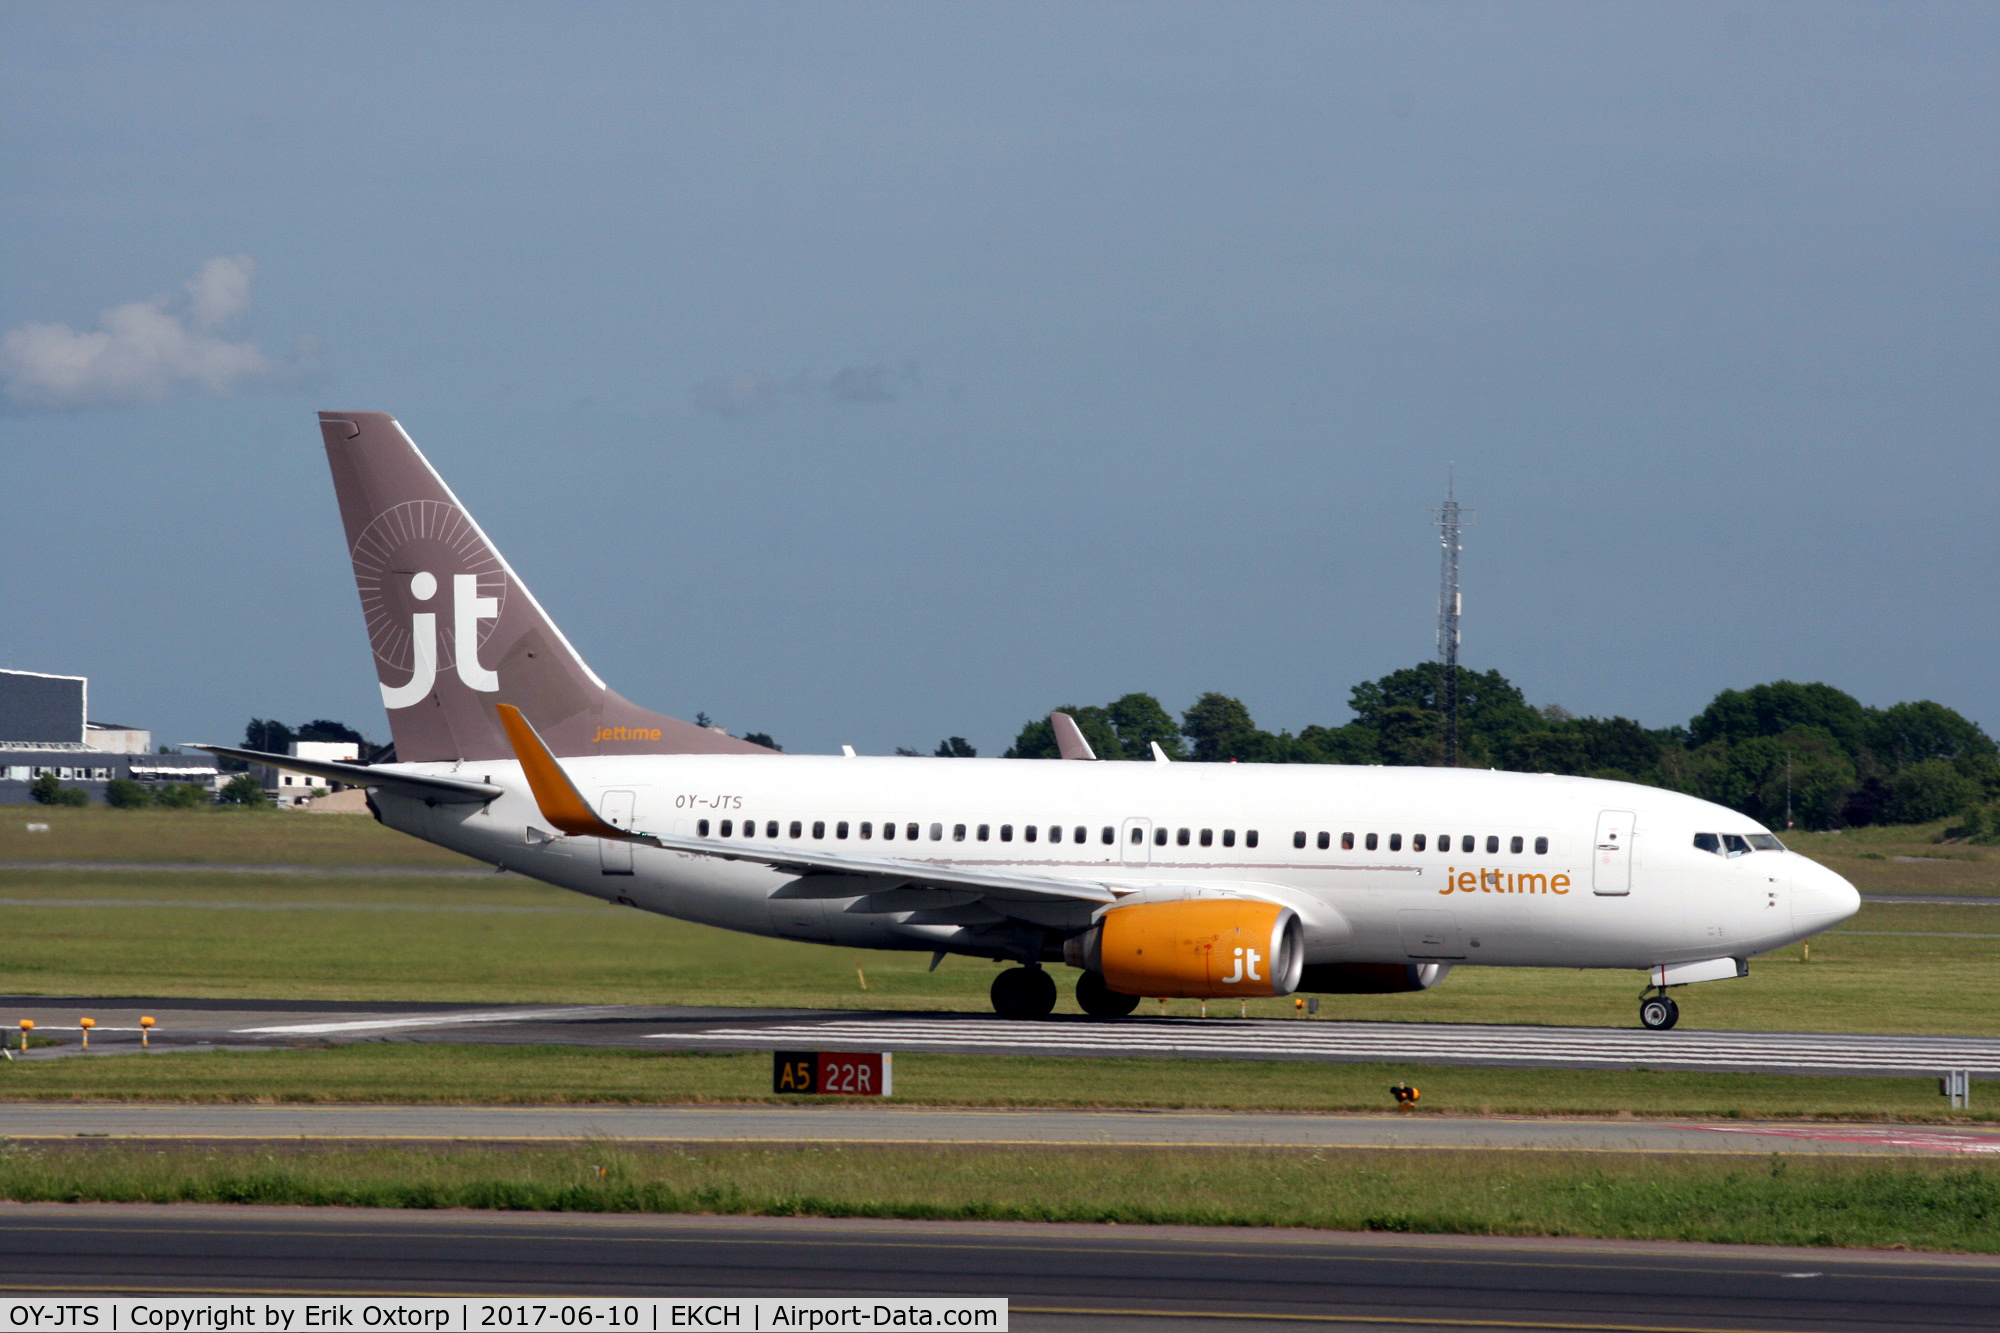 OY-JTS, 2003 Boeing 737-7K2 C/N 33465, OY-JTS taking off rw 22R